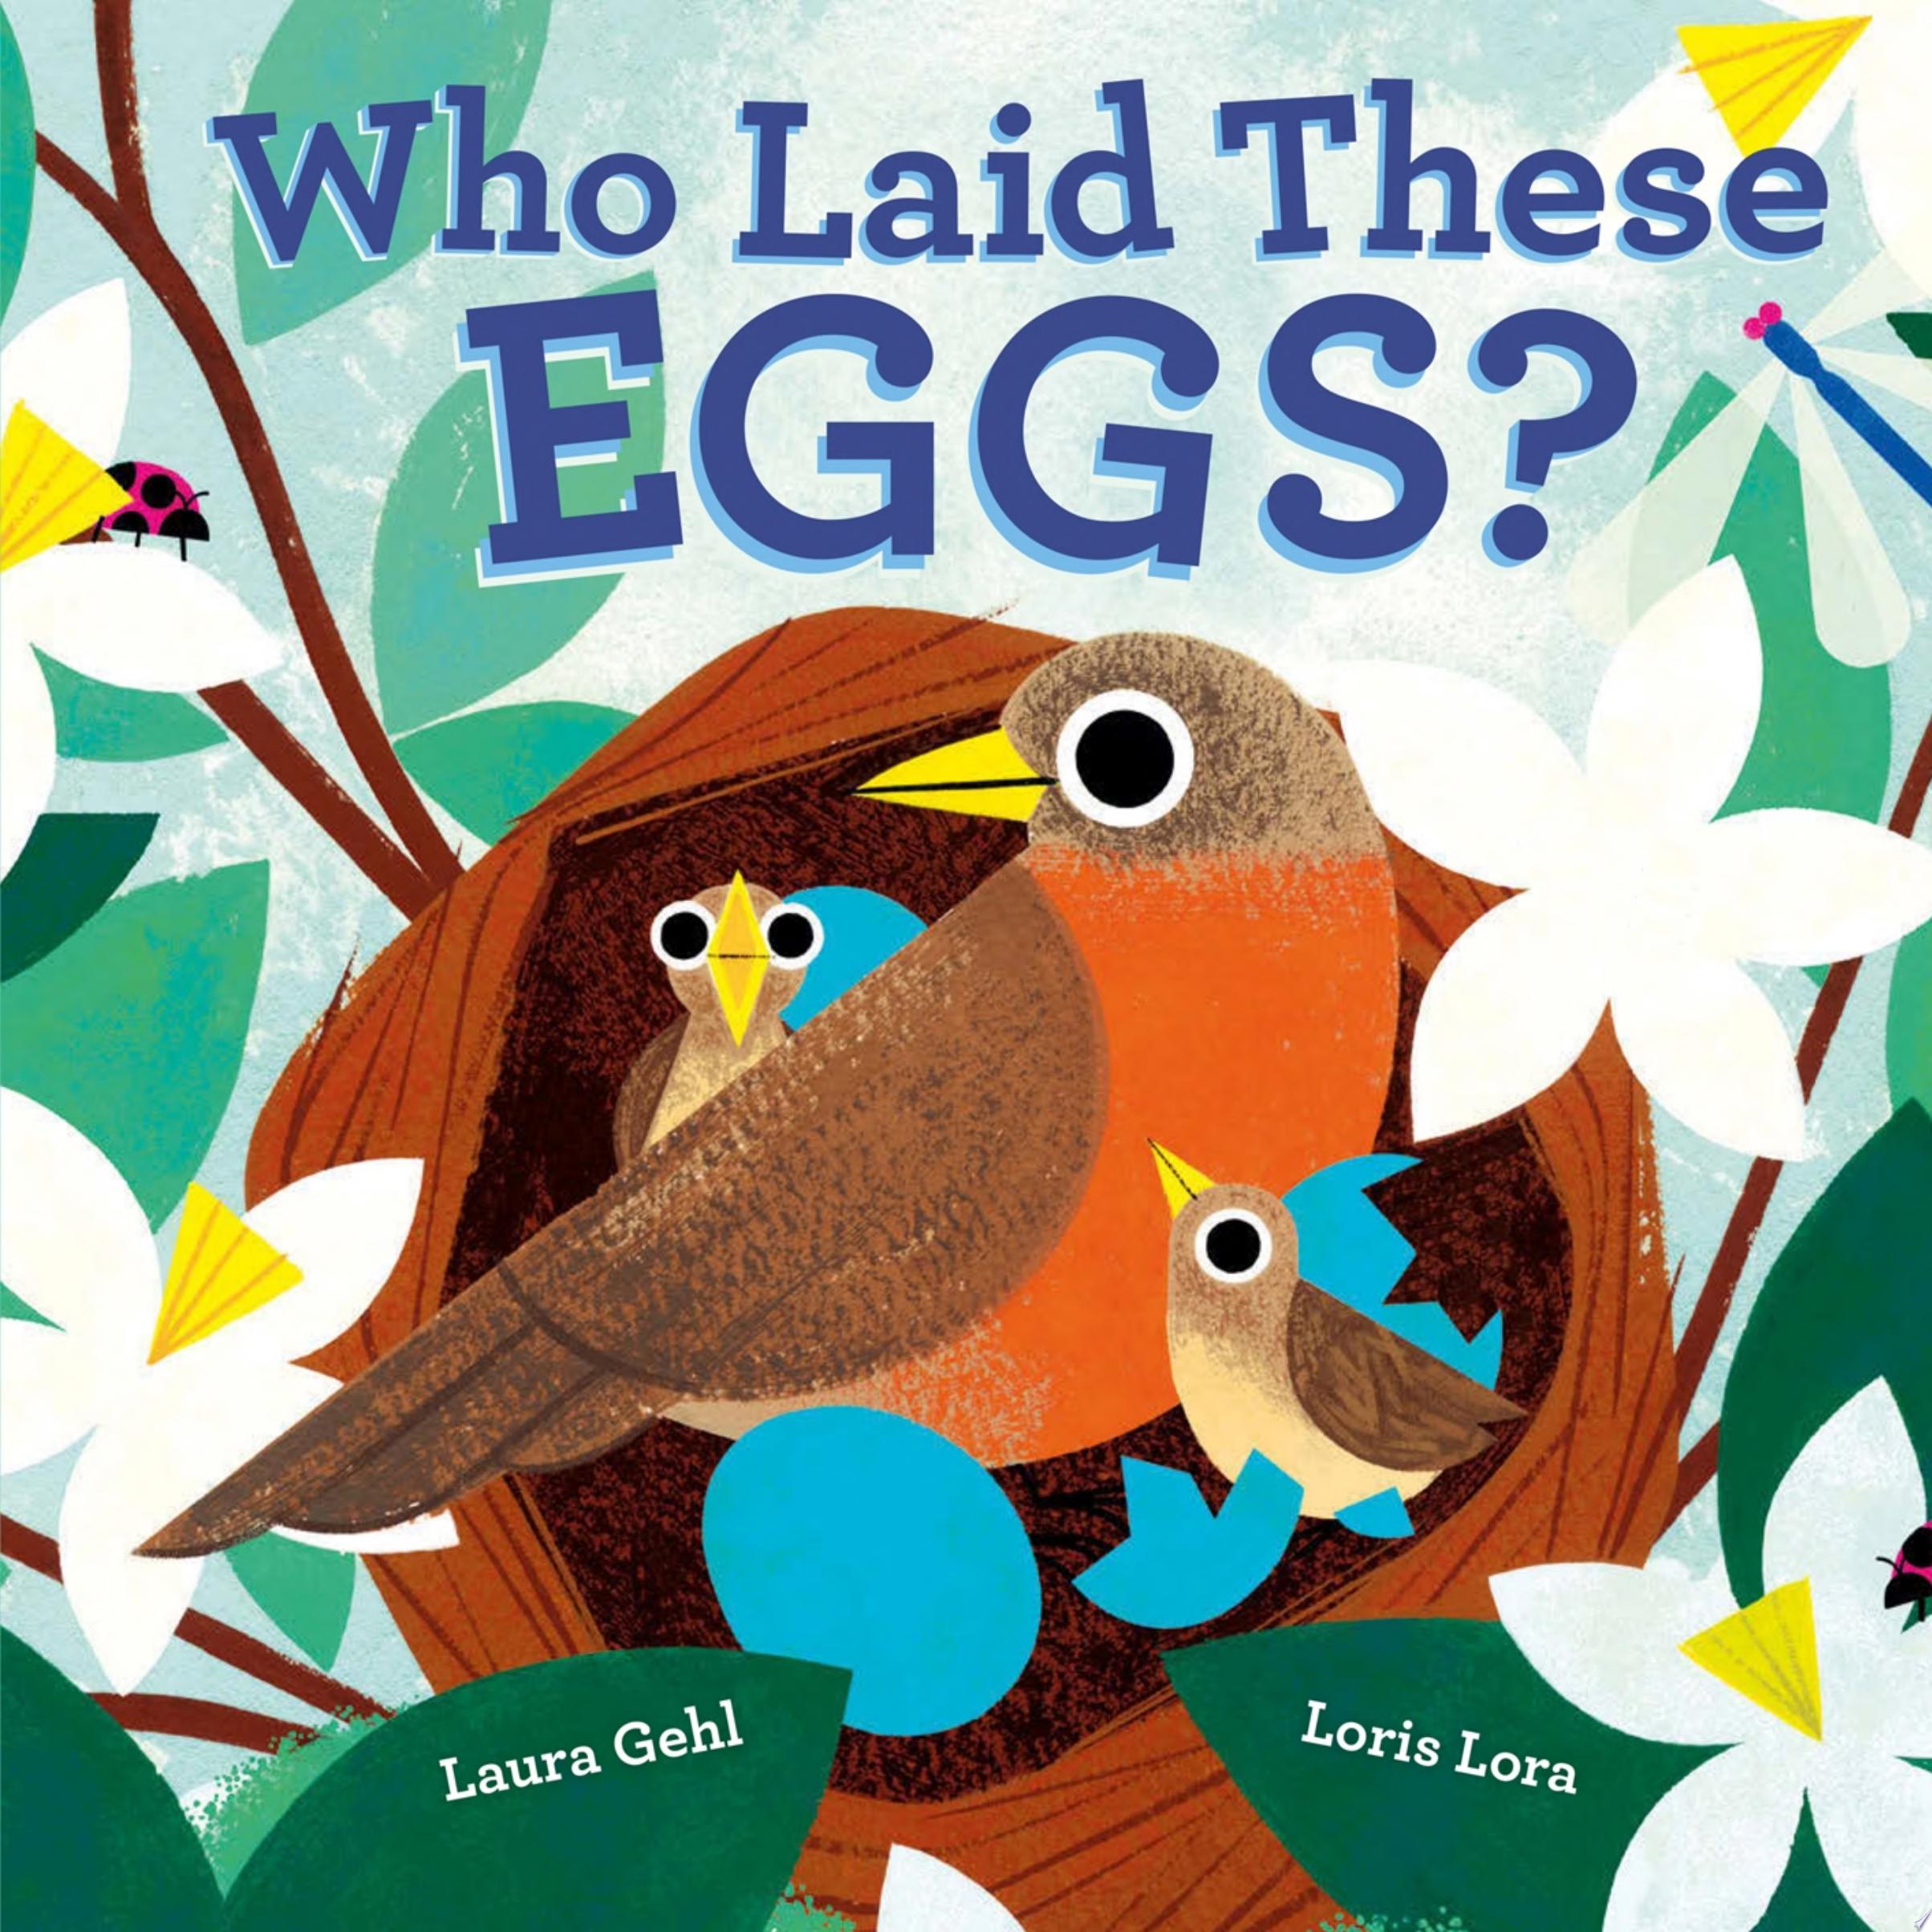 Image for "Who Laid These Eggs?"